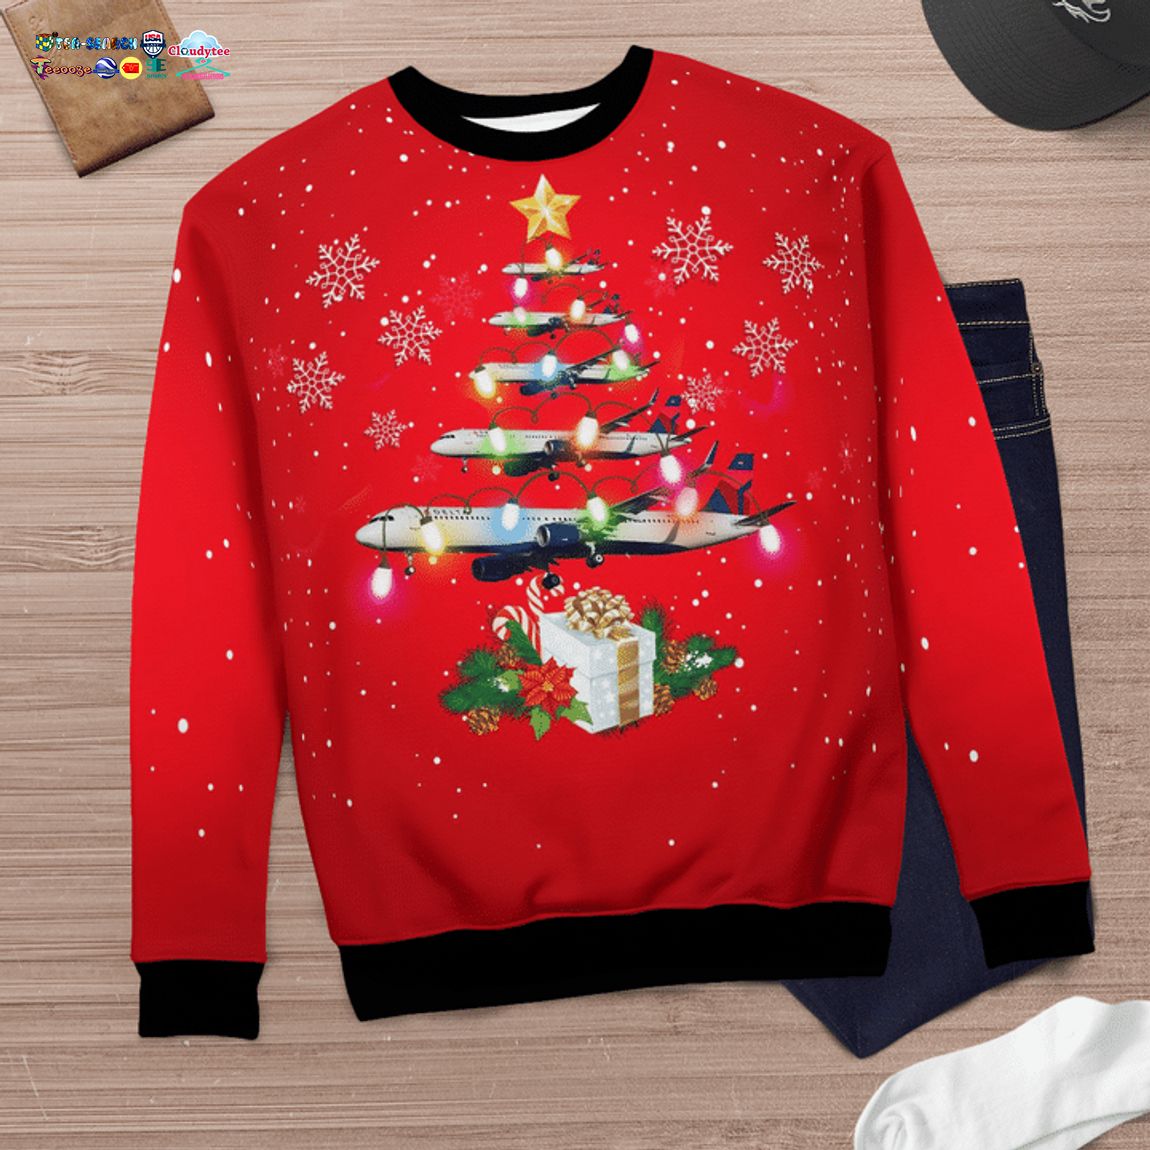 Delta Air Lines Airbus A321-200 3D Christmas Sweater